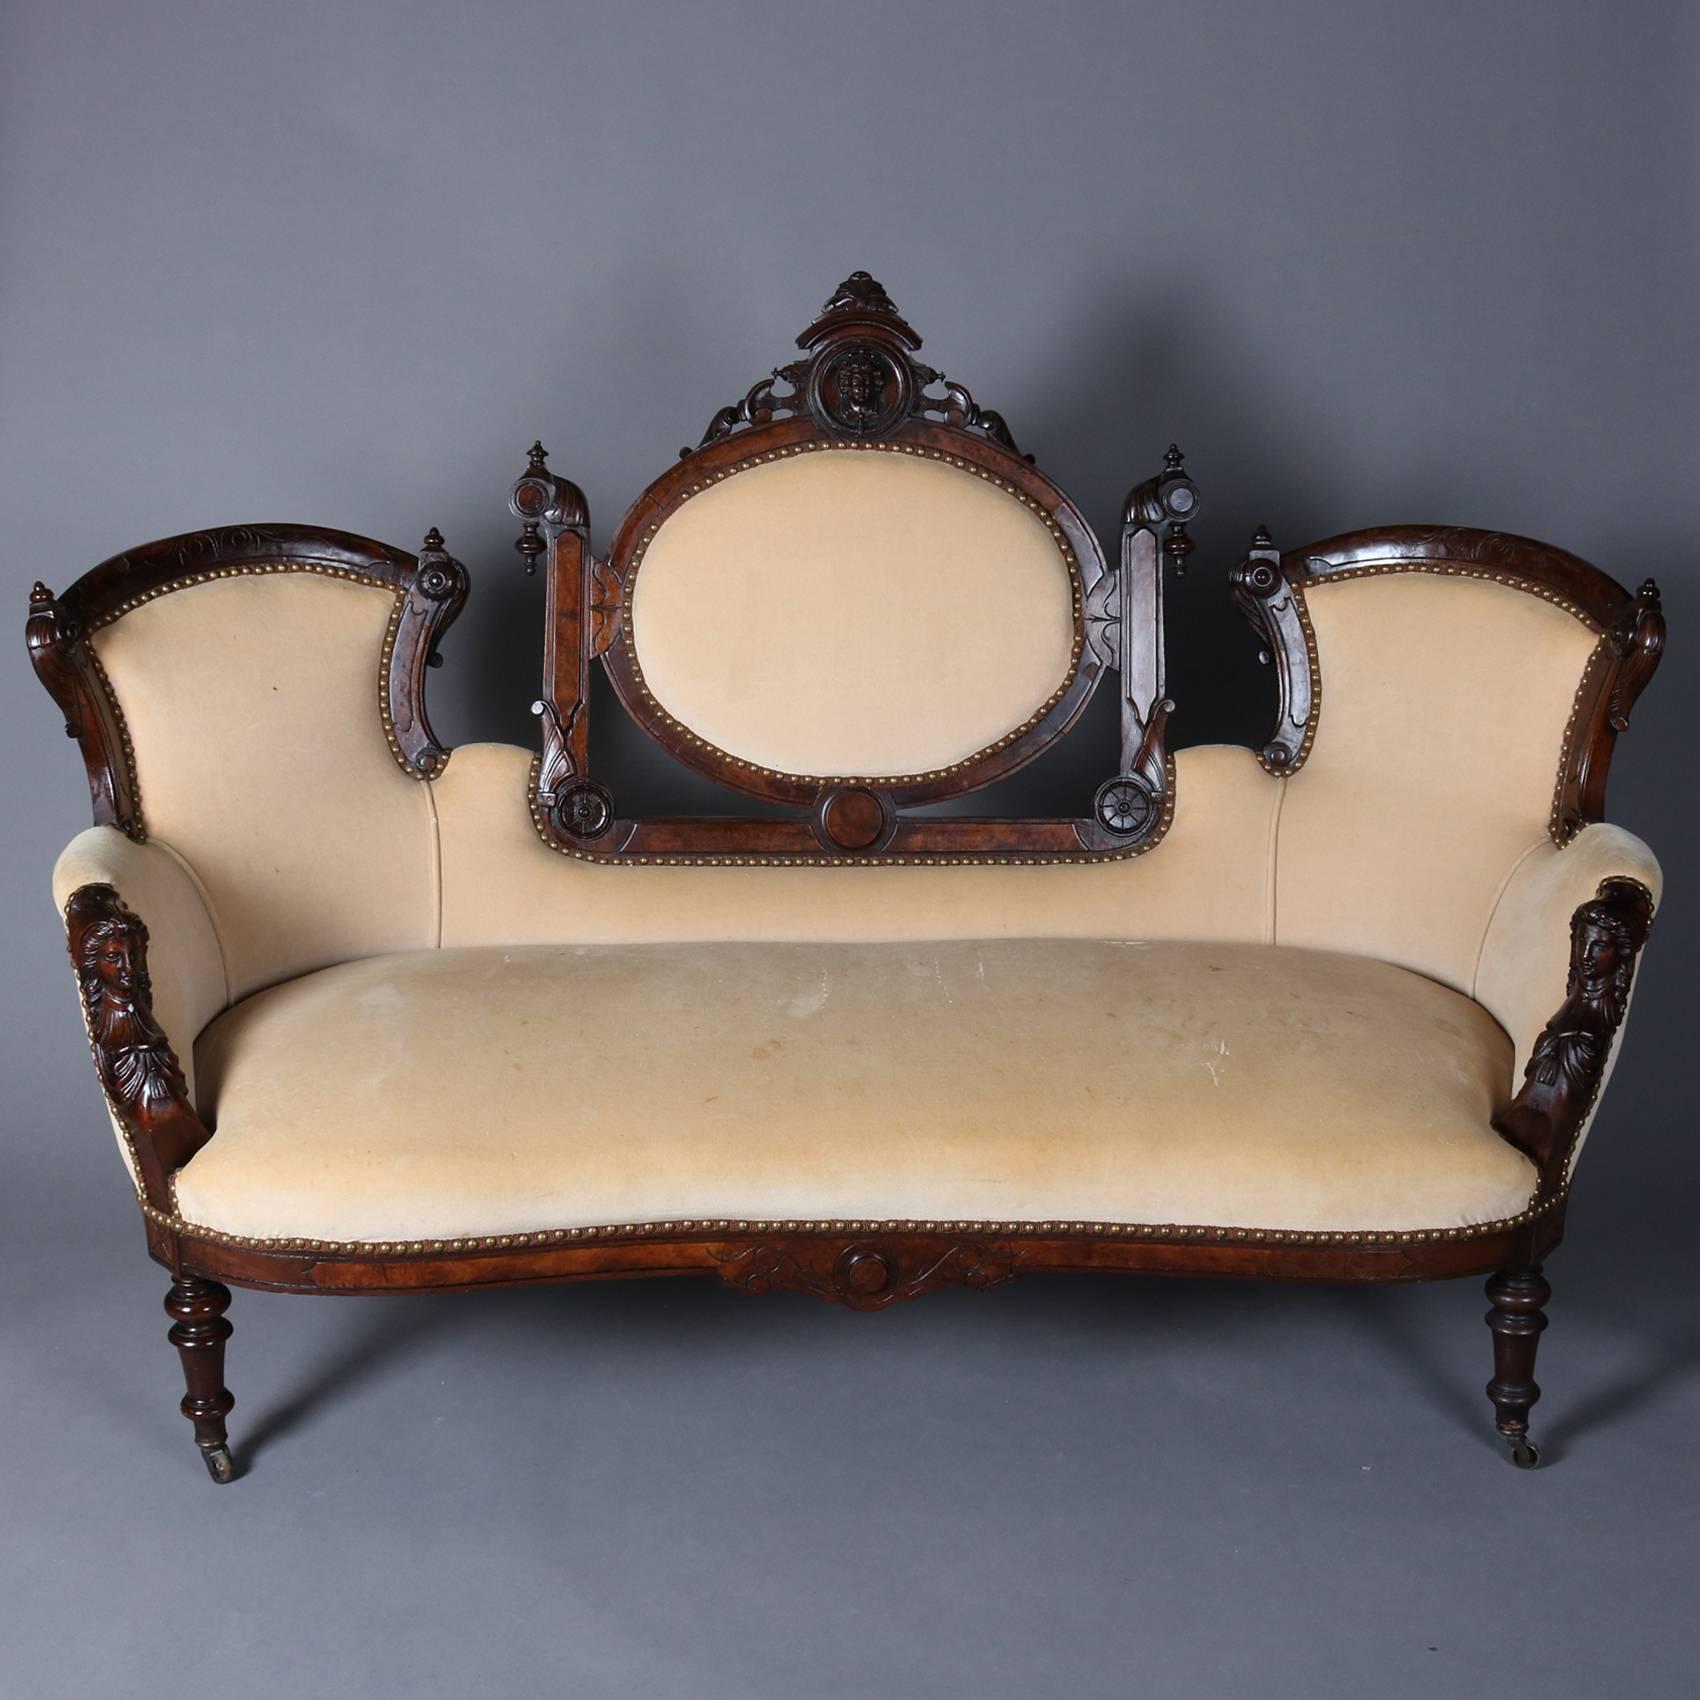 Antique Renaissance Revival three piece parlor set by John Jelliff features figural caved walnut frame with Jenny Lind mask on crests and arms, carved foliate and scroll decoration throughout, sofa with central framed upholstered medallion back and